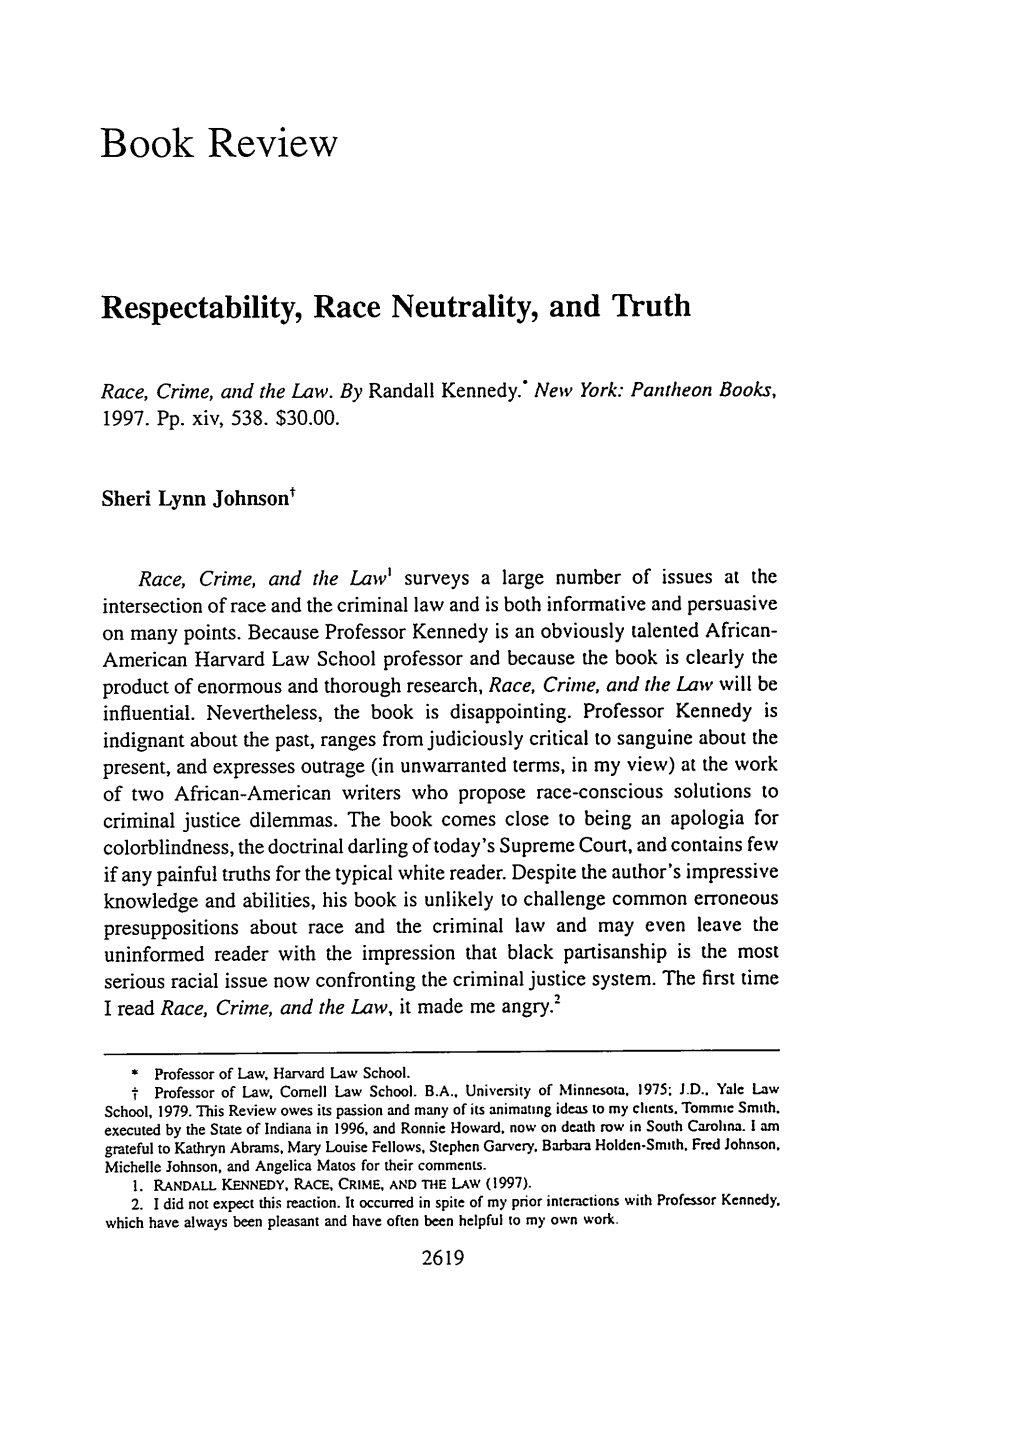 Respectability, Race Neutrality, and Truth